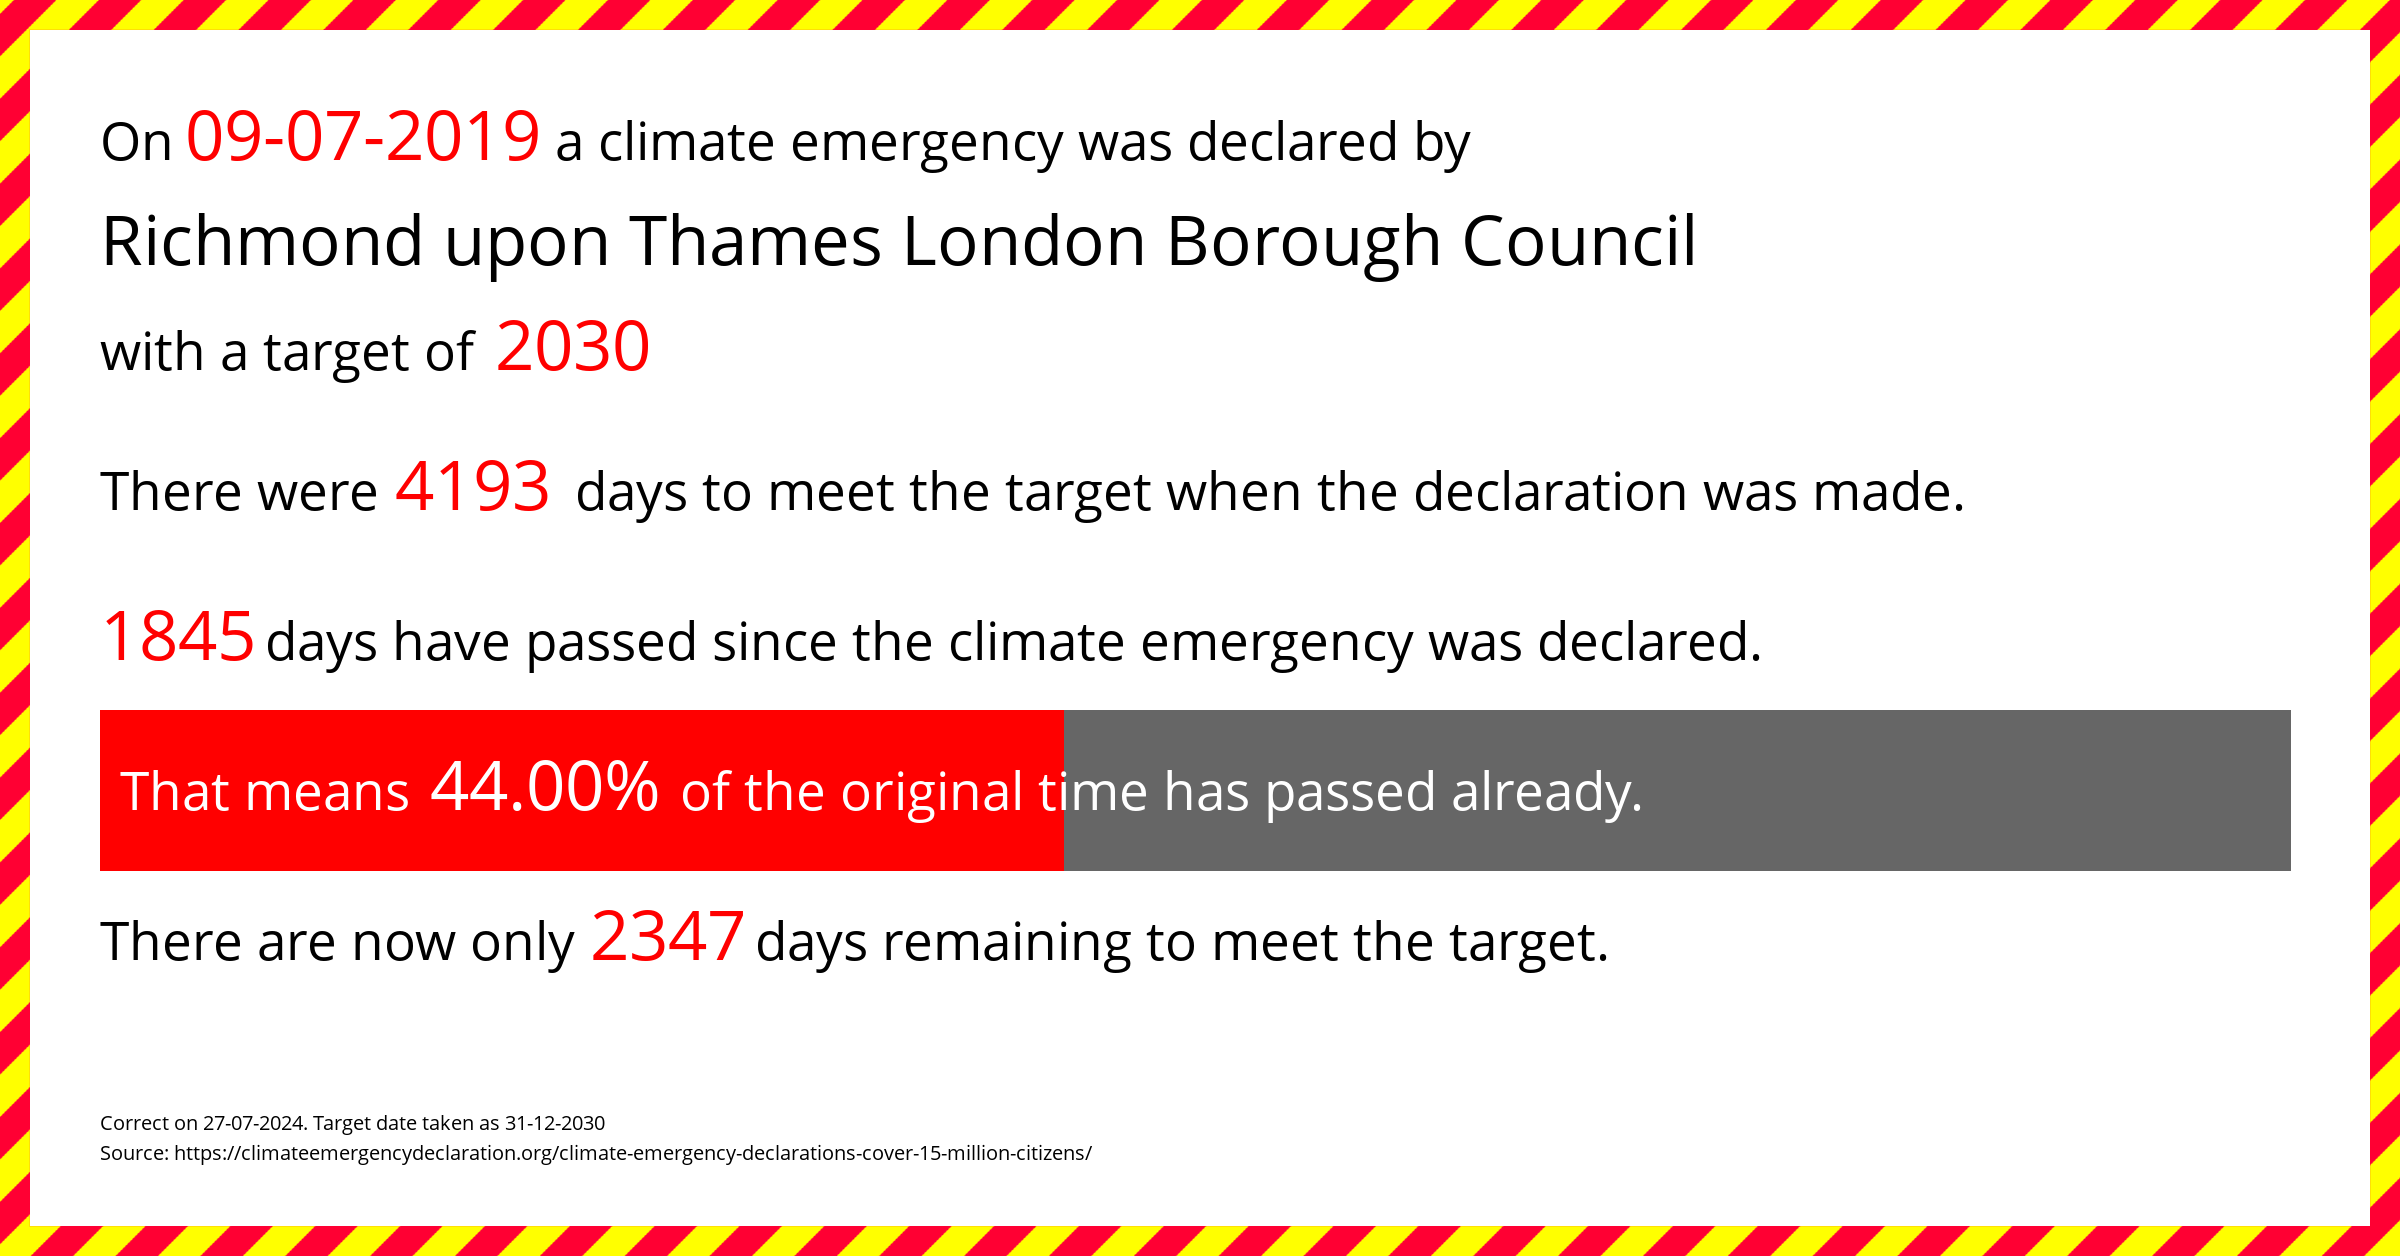 Richmond upon Thames London Borough Council declared a Climate emergency on Tuesday 9th July 2019, with a target of 2030.